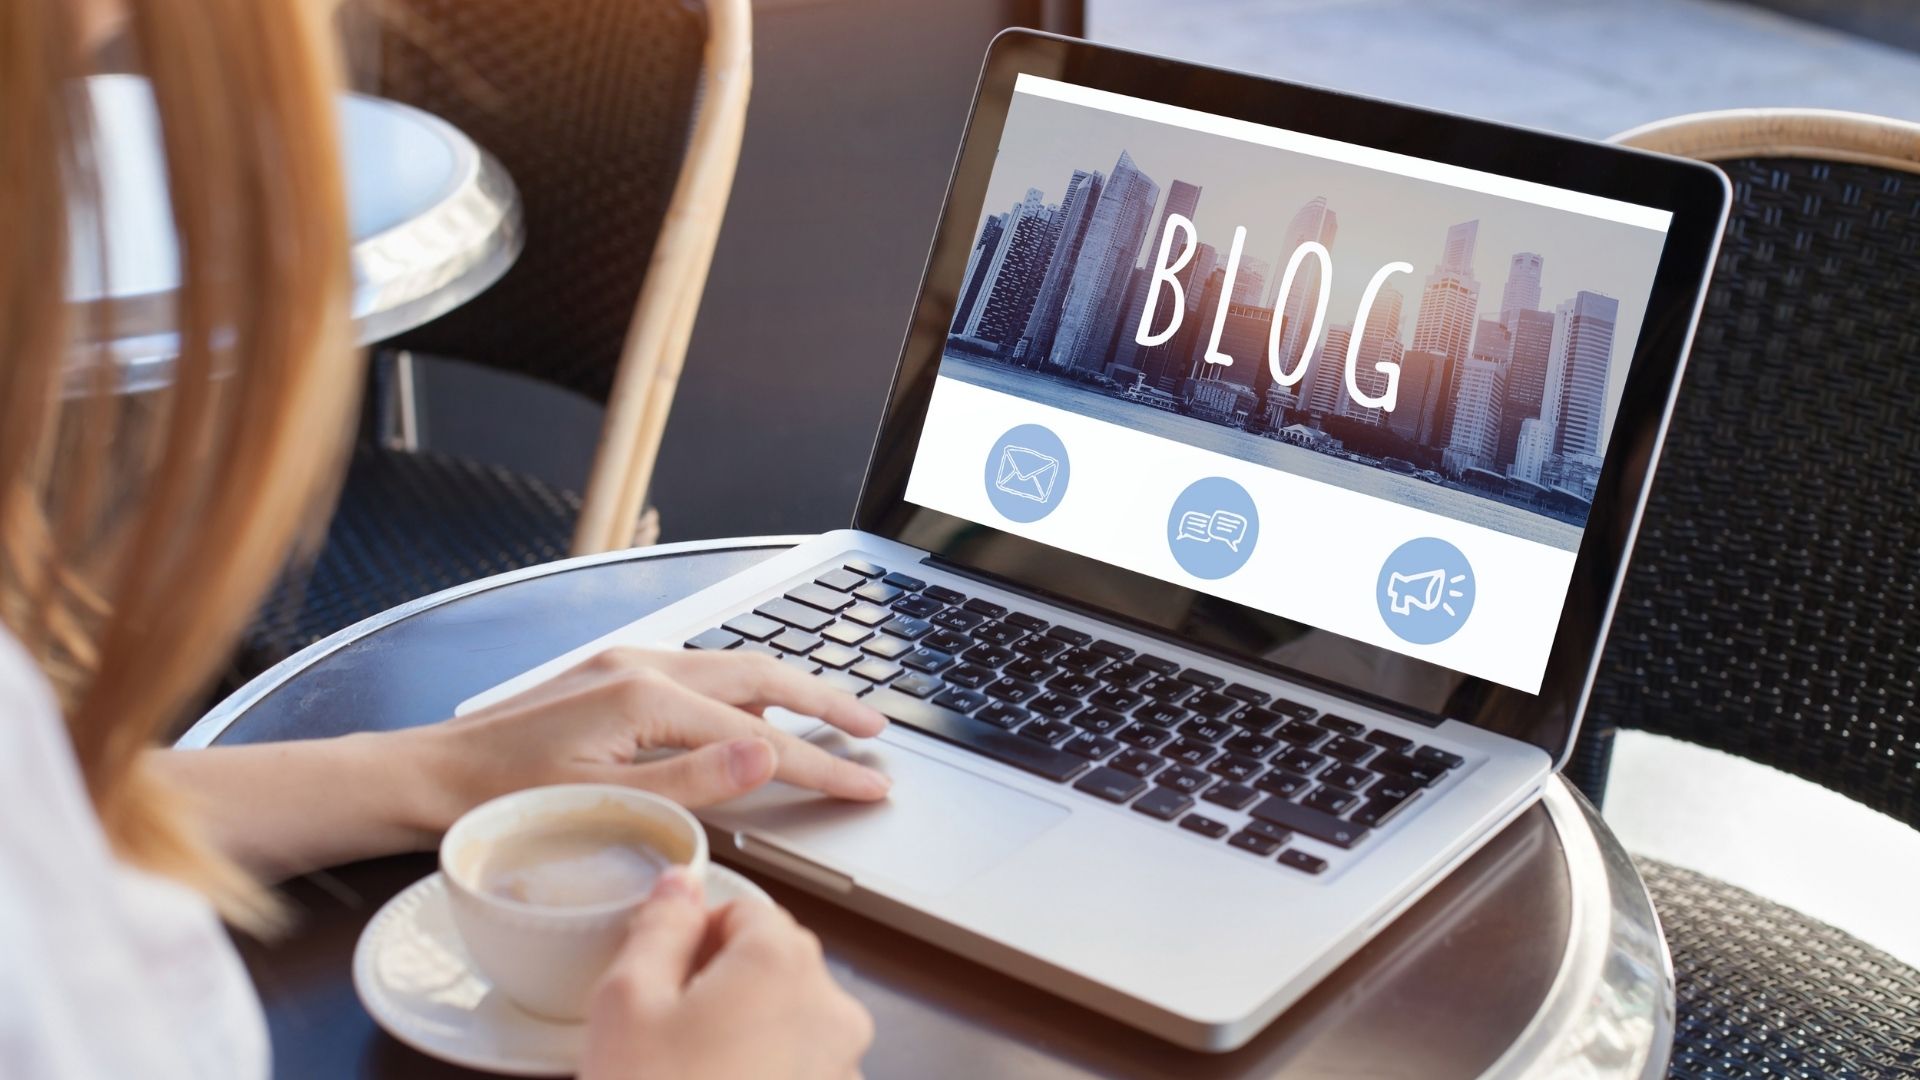 Featured image for “Why fresh blog content can be so valuable for your website”